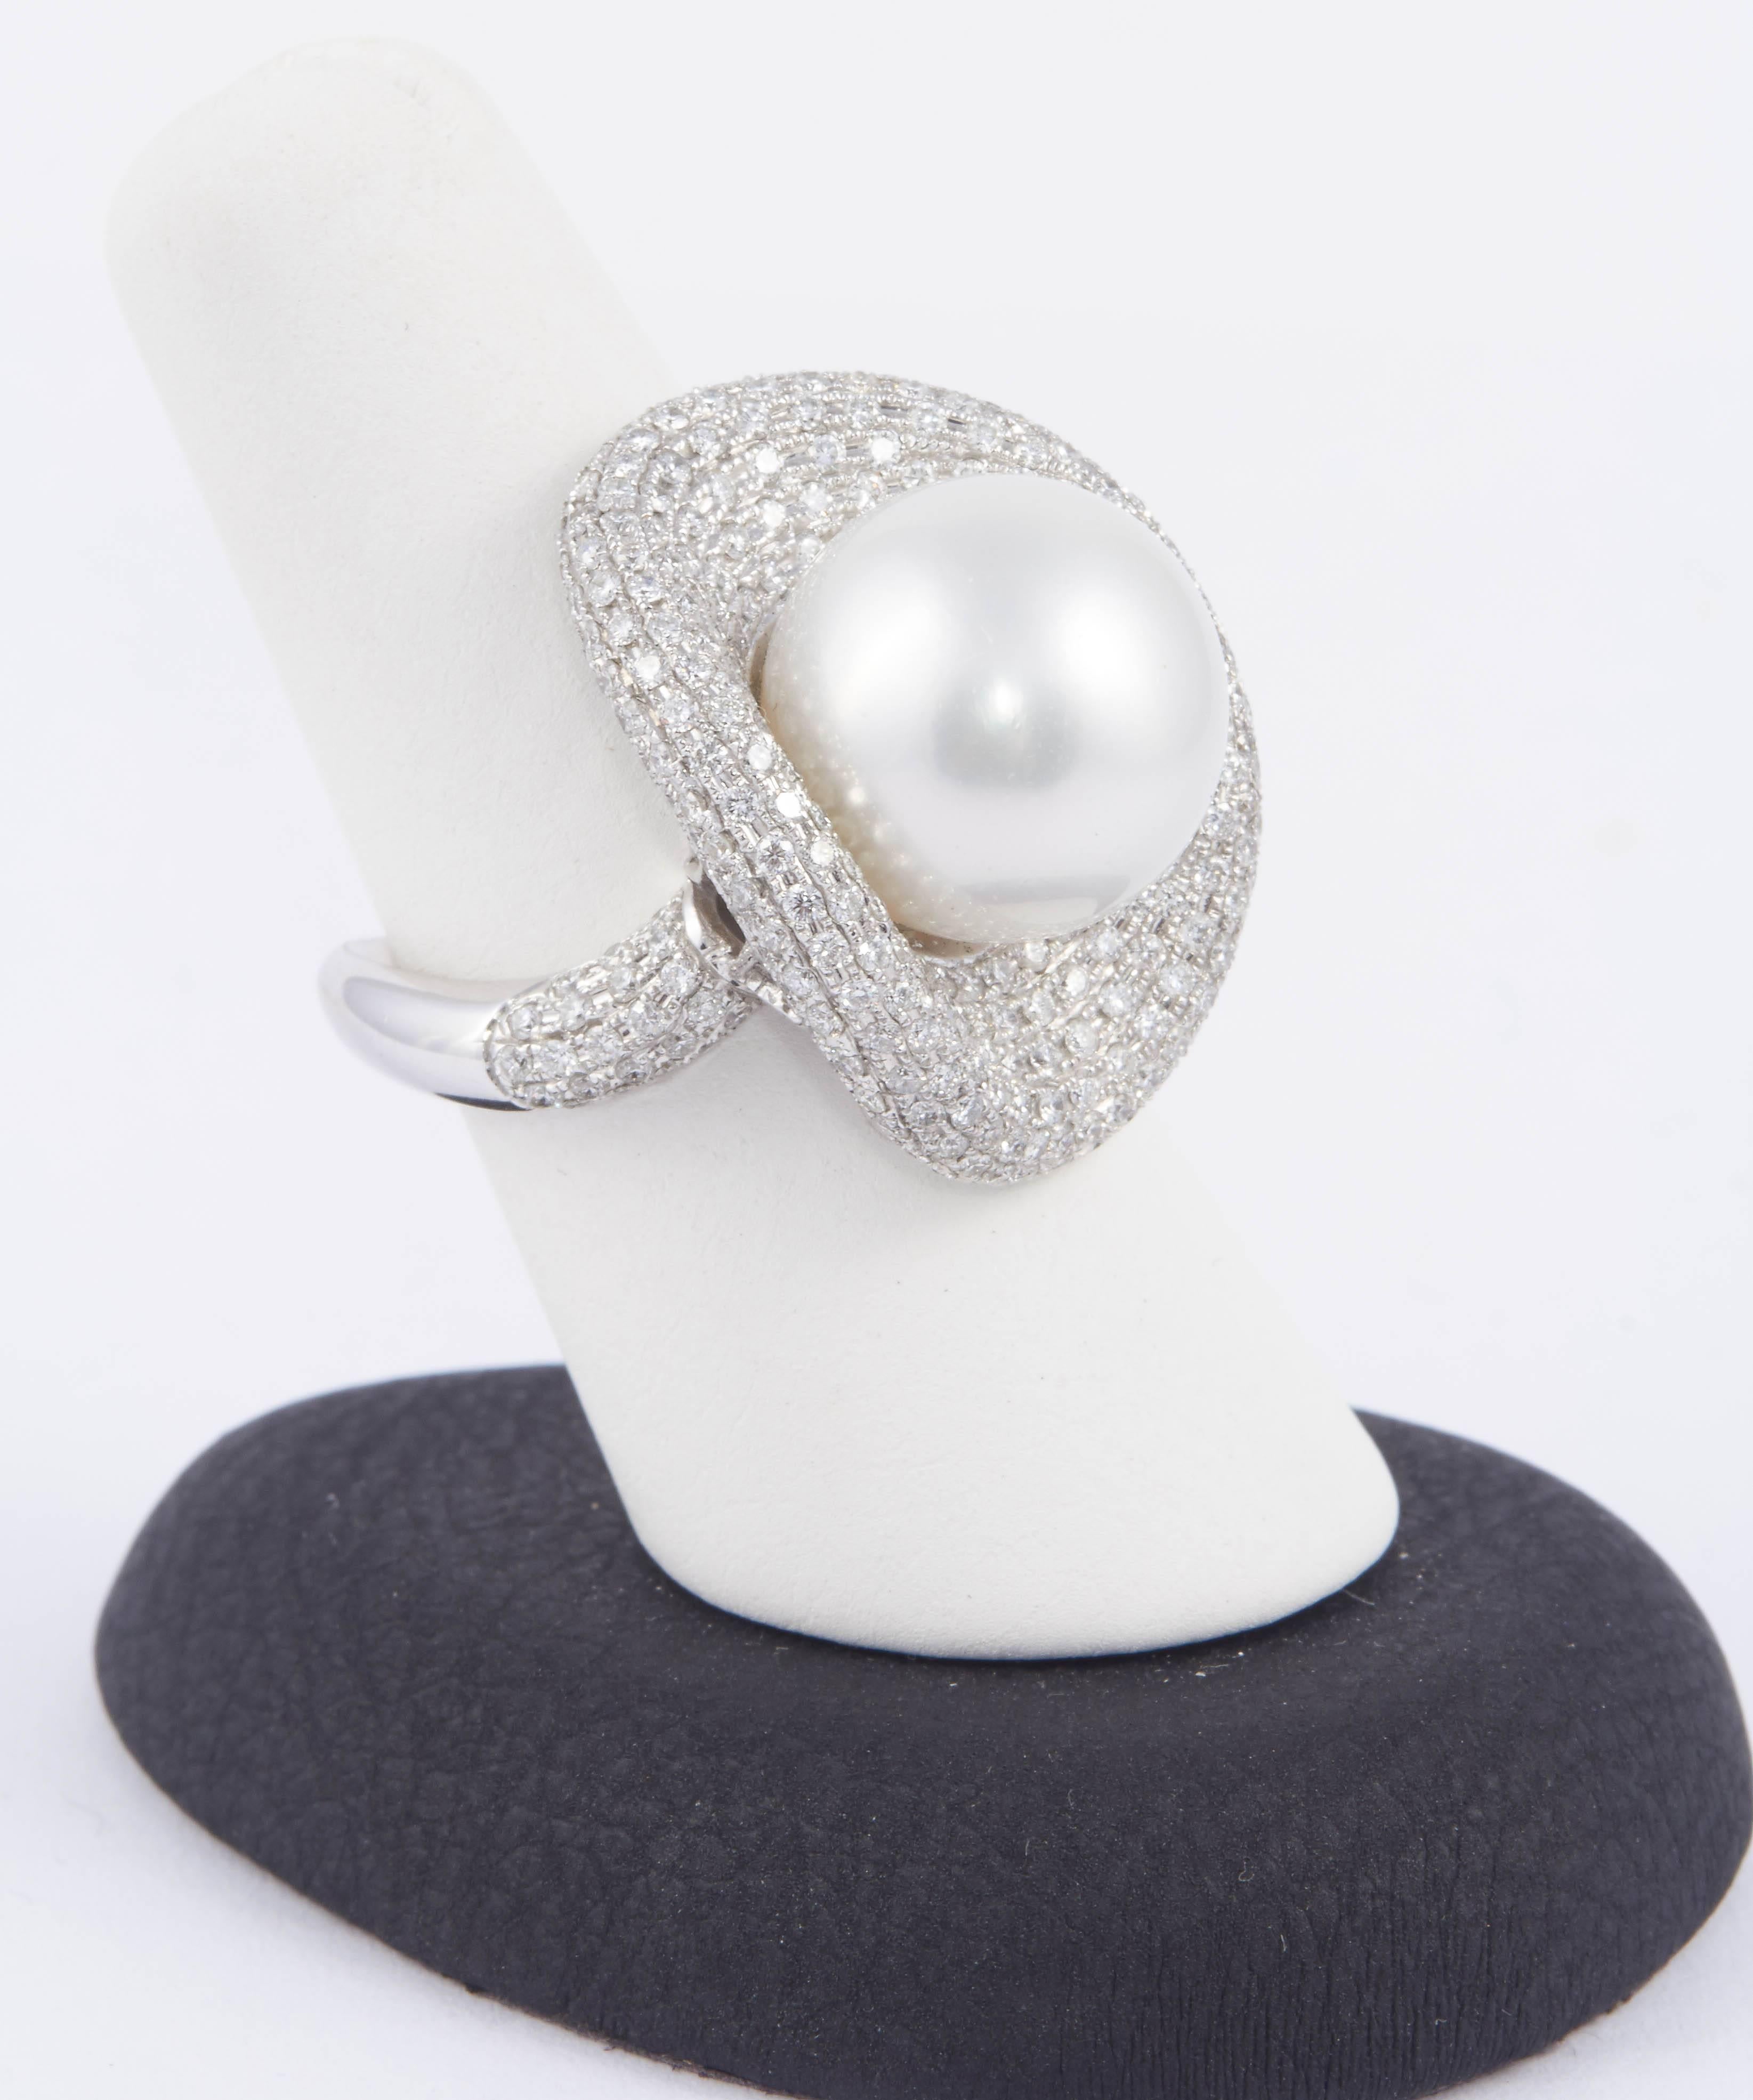 One of a kind
Diamond Weight: 2.48 Cts
18K white Gold
South Sea Cultured Pearl 13.7 mm
